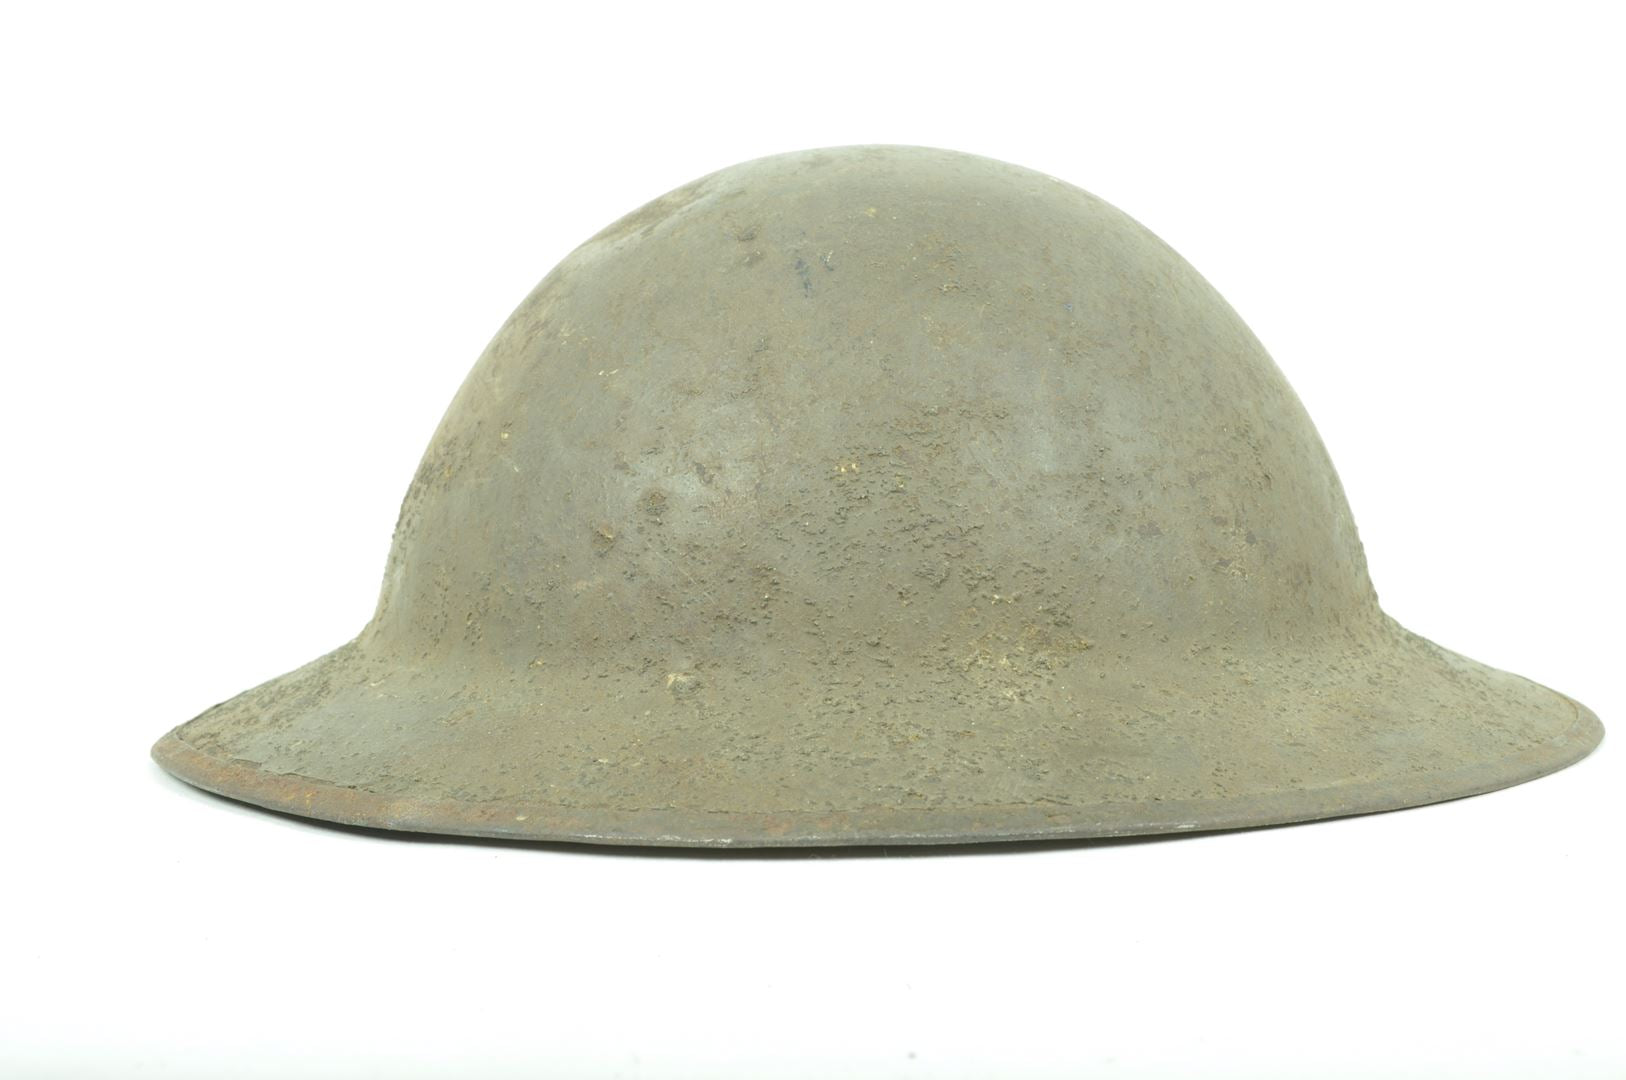 Casque US 17 / 28th infantry division "Keystone"